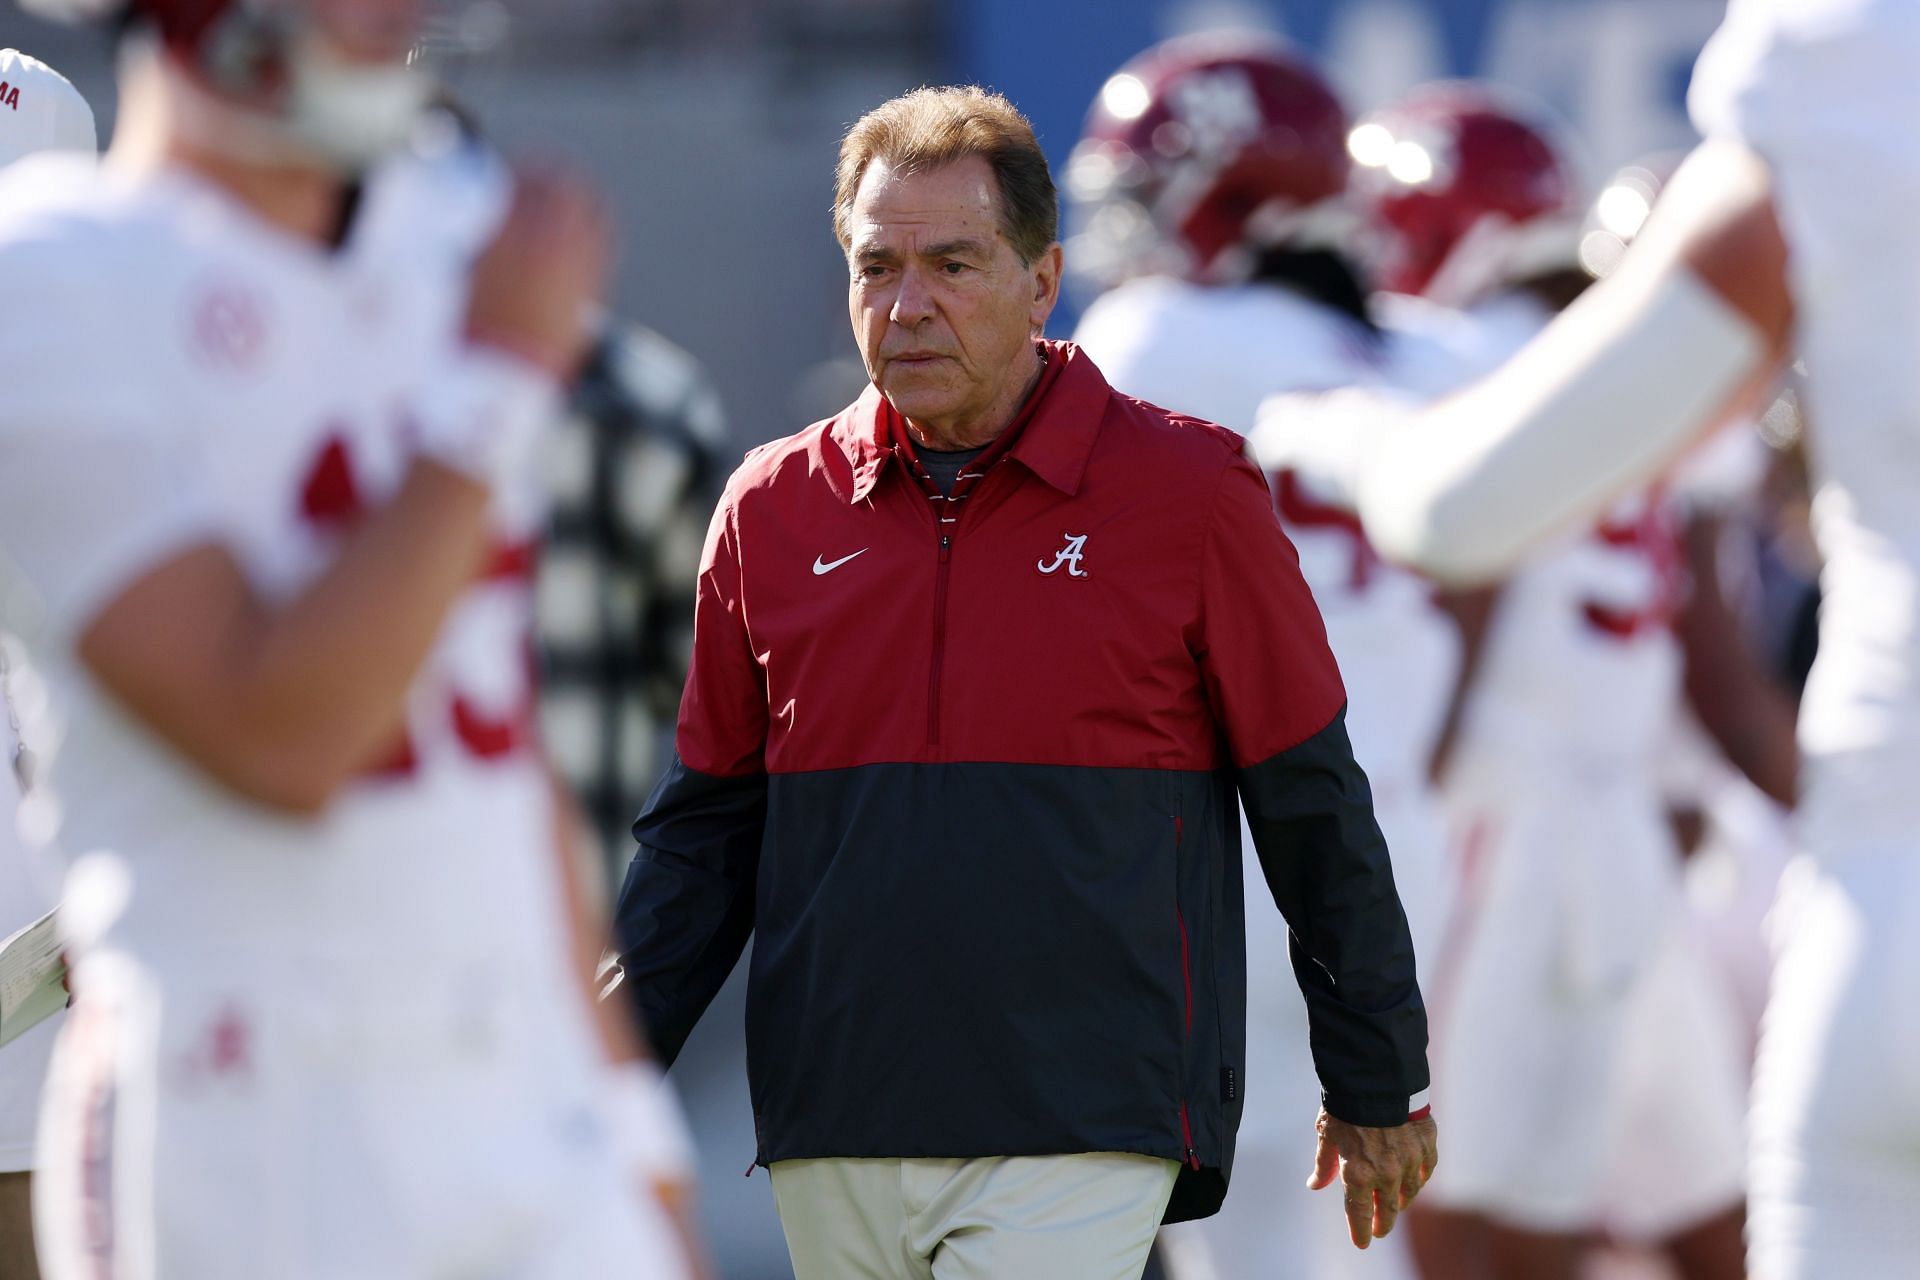 PASADENA, CALIFORNIA, JANUARY 01: Head coach Nick Saban of the Alabama Crimson Tide before the CFP Semifinal Rose Bowl Game against the Michigan Wolverines at Rose Bowl Stadium on January 1, 2024, in Pasadena, California. (Photo by Harry How/Getty Images)